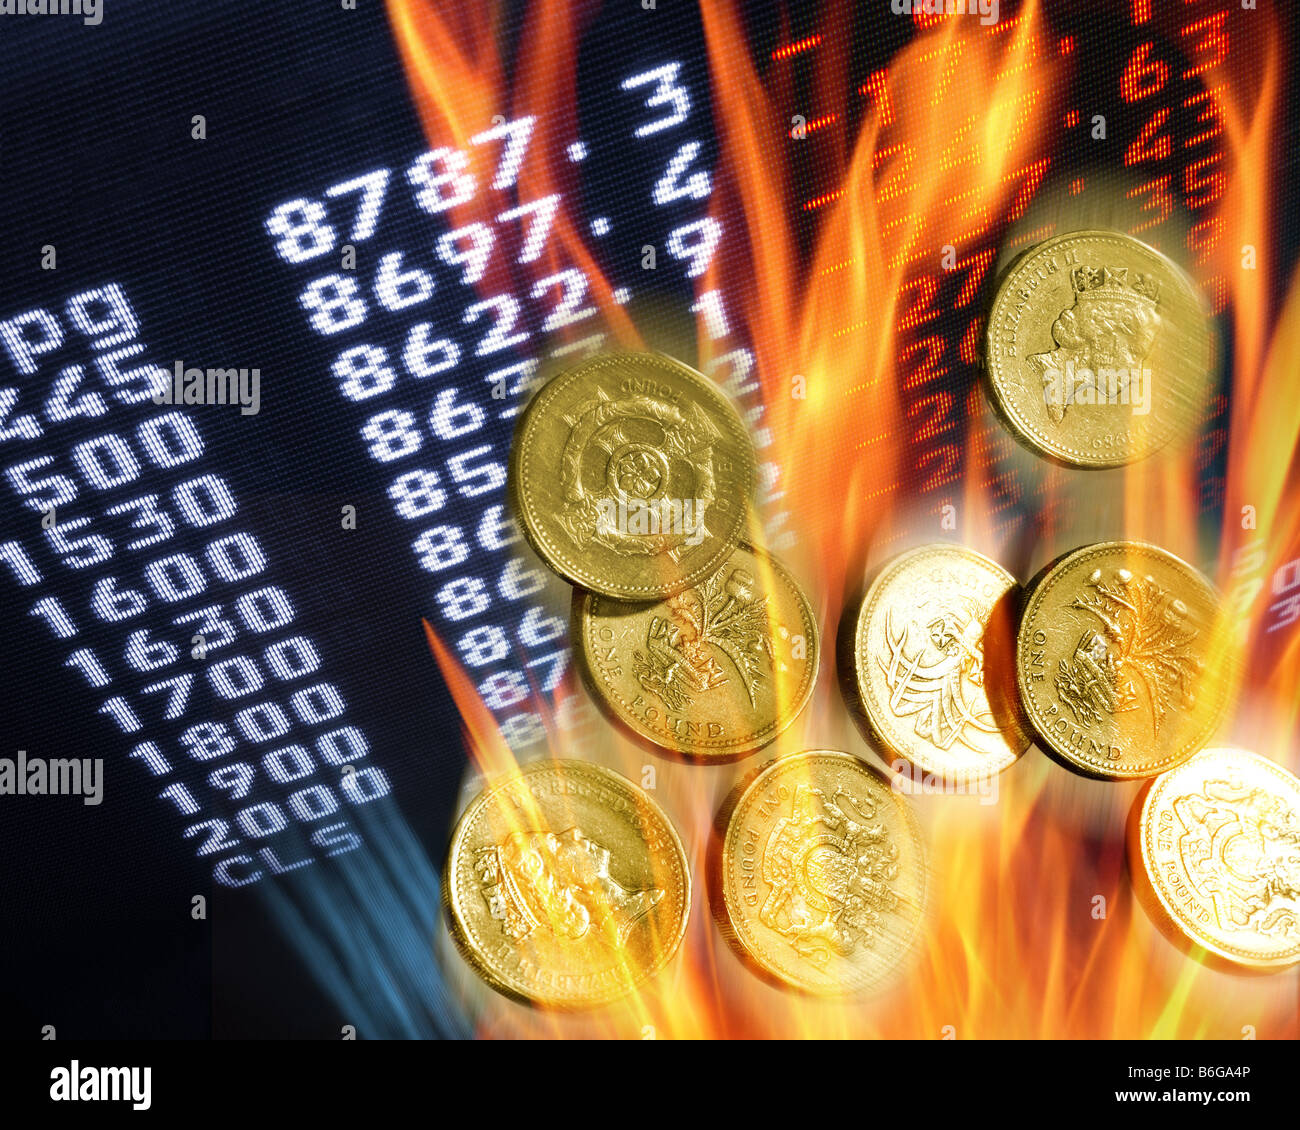 FINANCIAL CONCEPT: Sterling in Meltdown Stock Photo